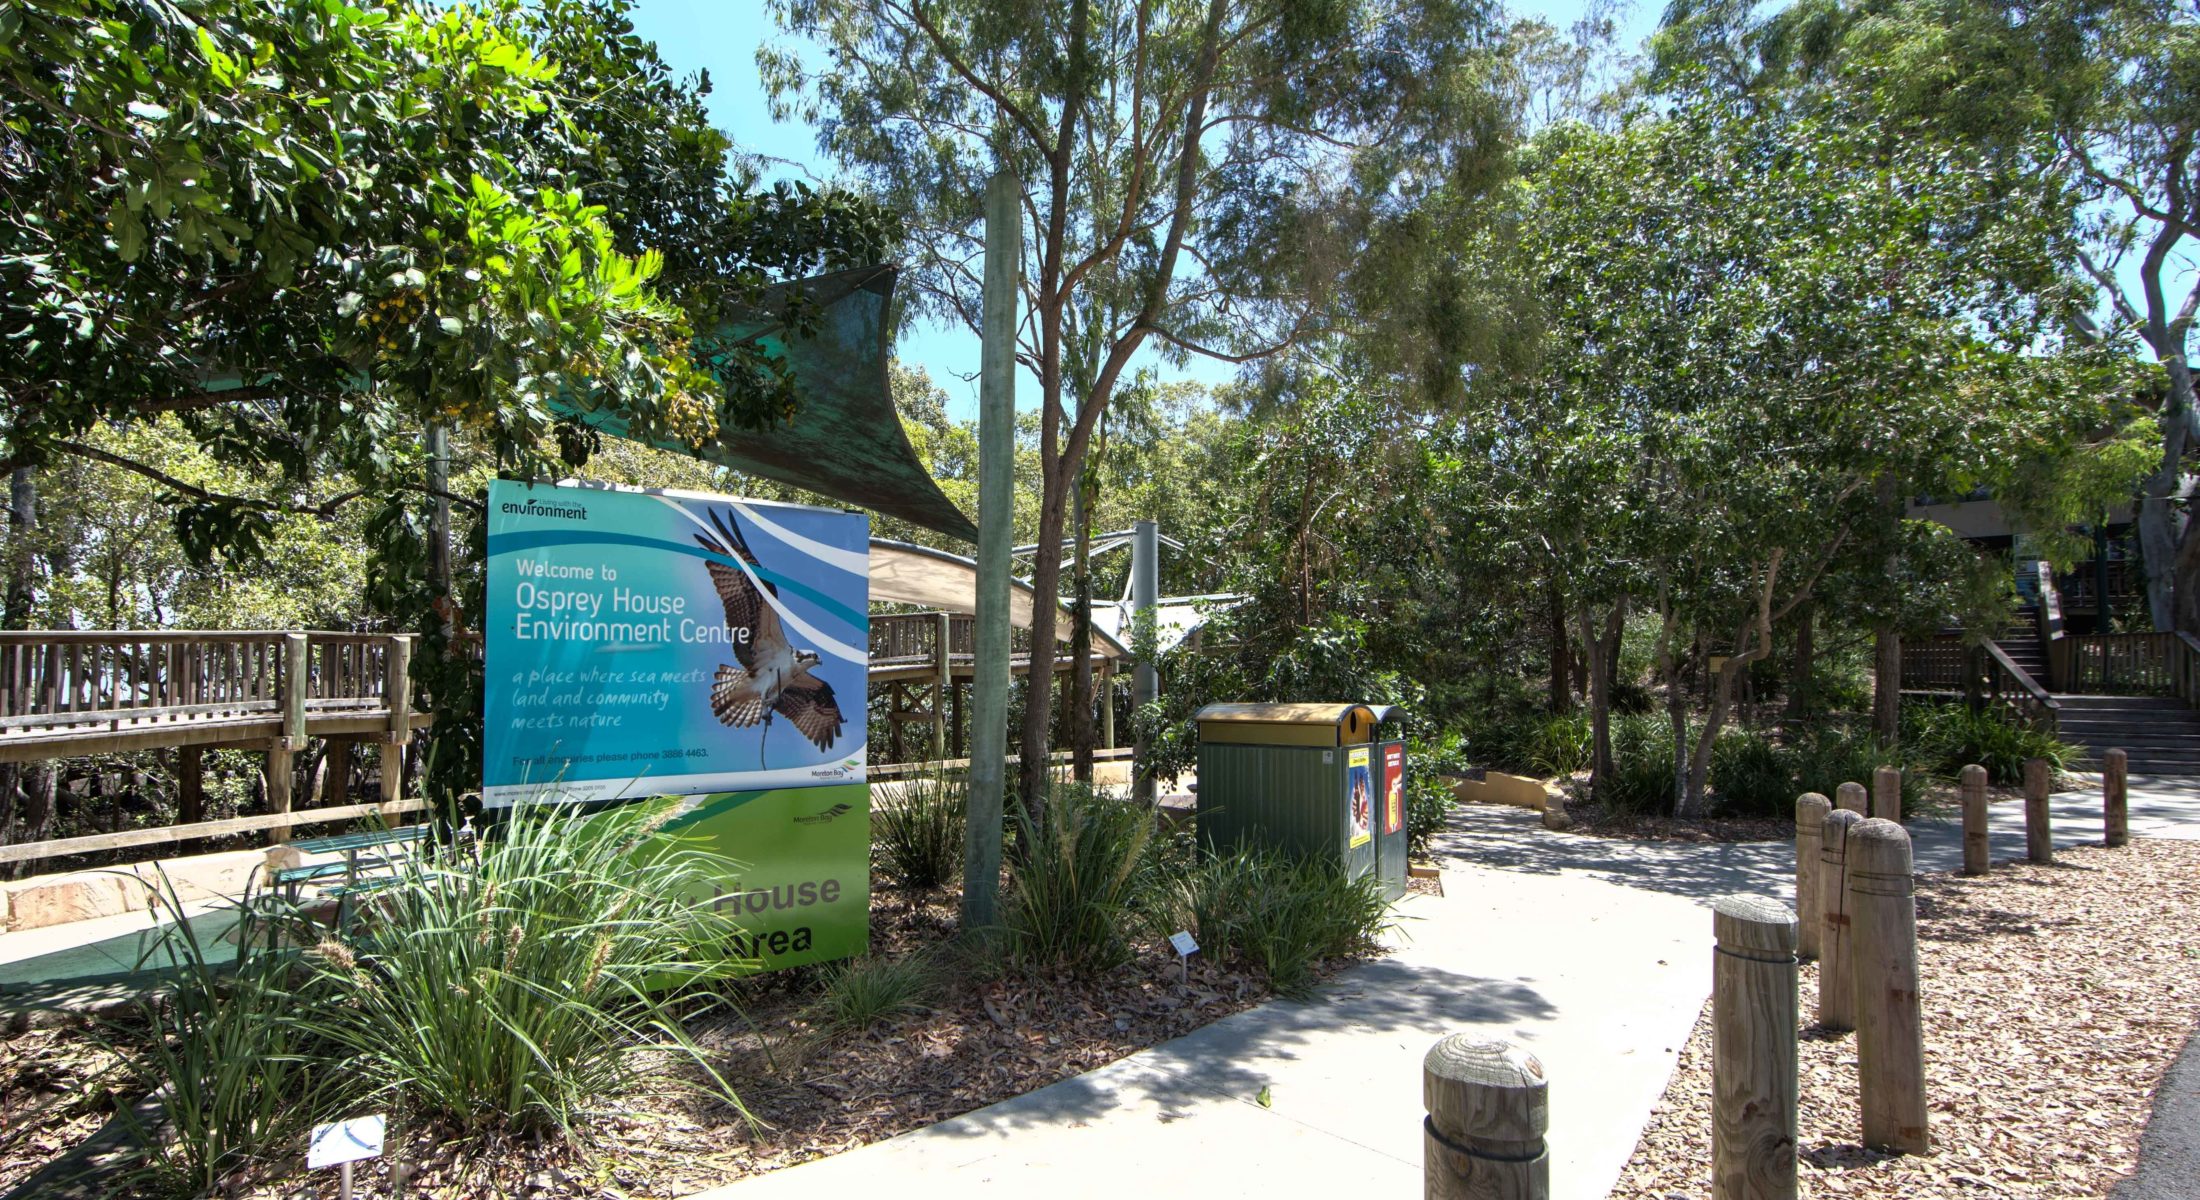 Osprey House Education Centre has accessible boardwalks and an education centre